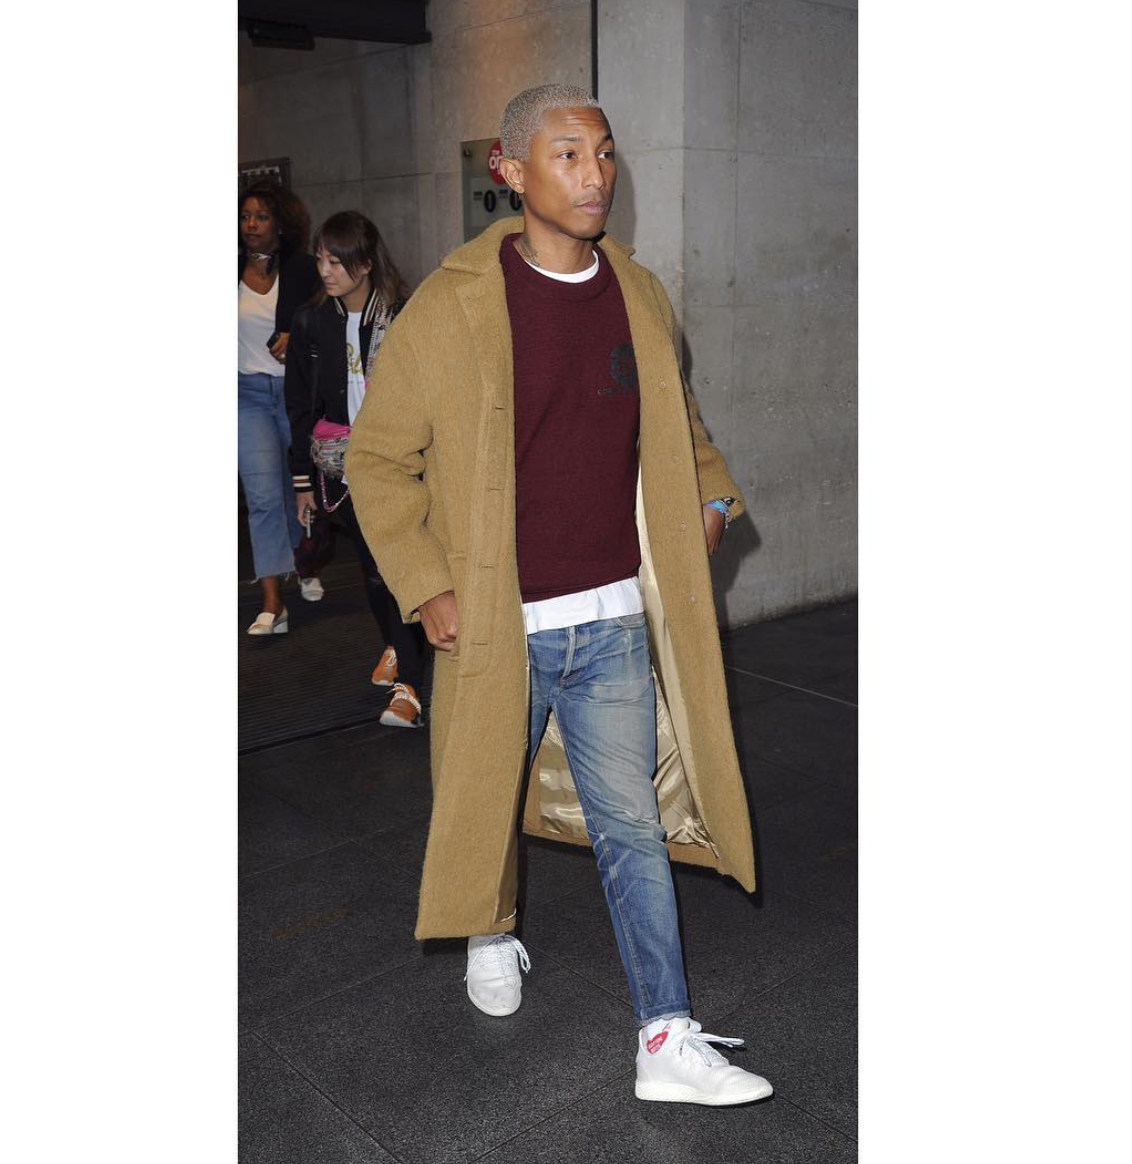 Pharrell Williams In Long Coat, Human Socks And adidas Sneakers – PAUSE Online | Men's Fashion, Street Style, Fashion & Streetwear